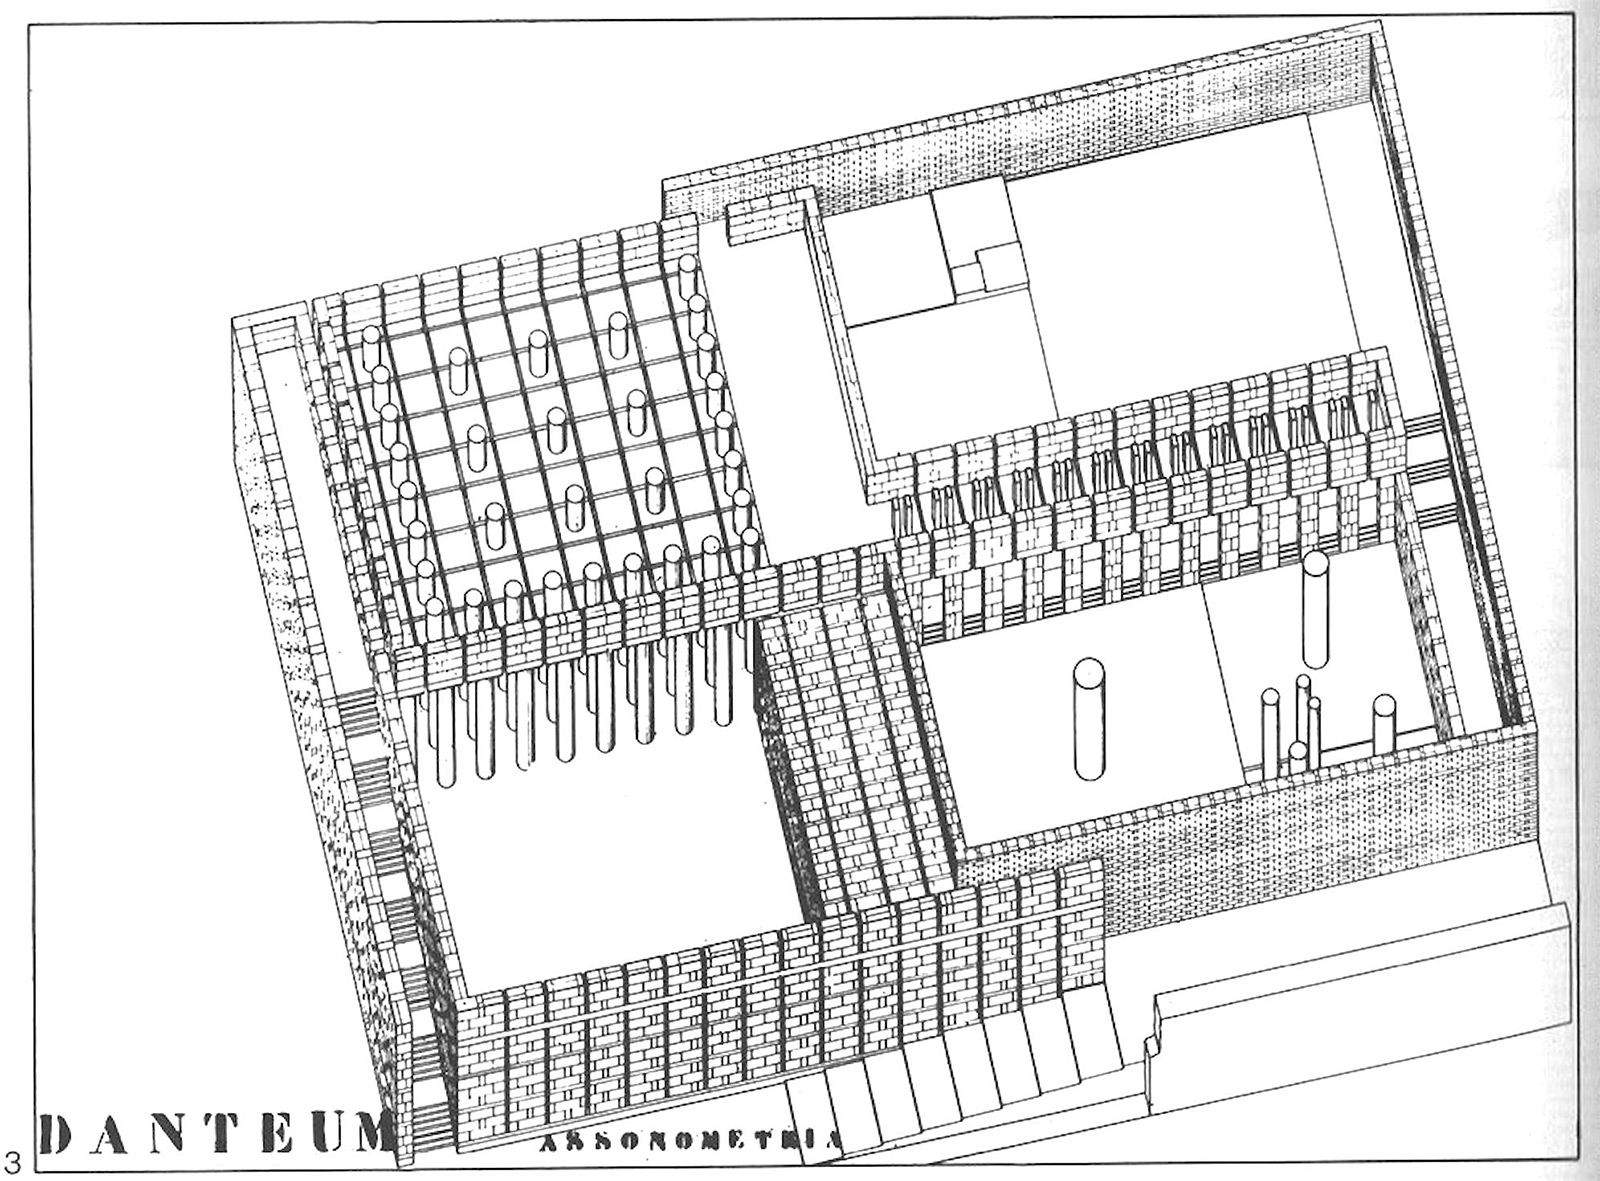 Sketch for the unrealized Danteum that Giuseppe Terragni was commissioned to design for Rome in 1938.